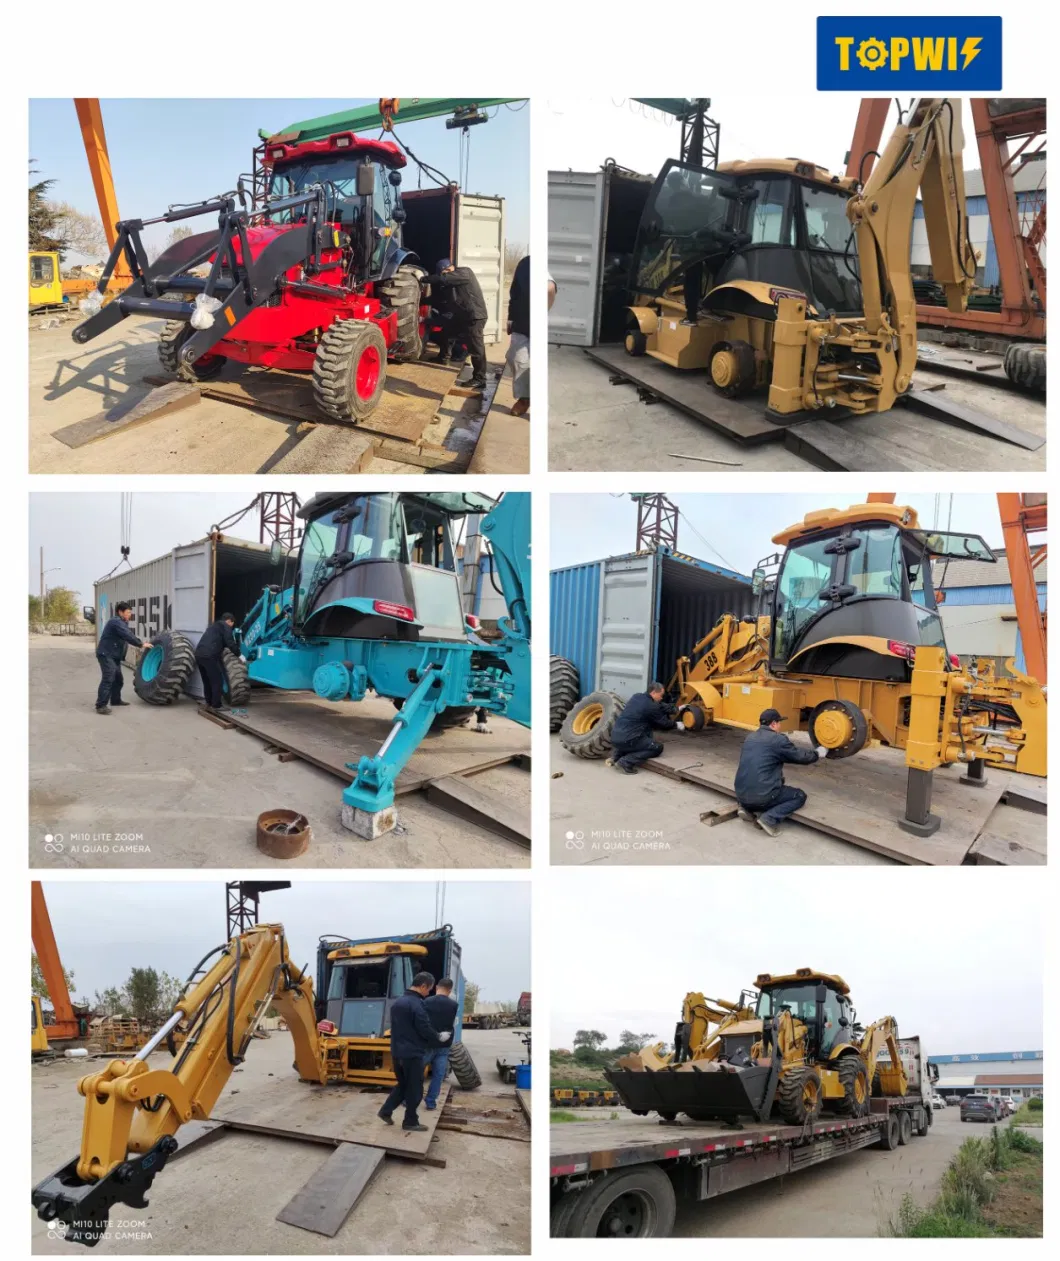 Chinese Hydraulic Heavy Equipment Mini Tractor Loader Backhoe